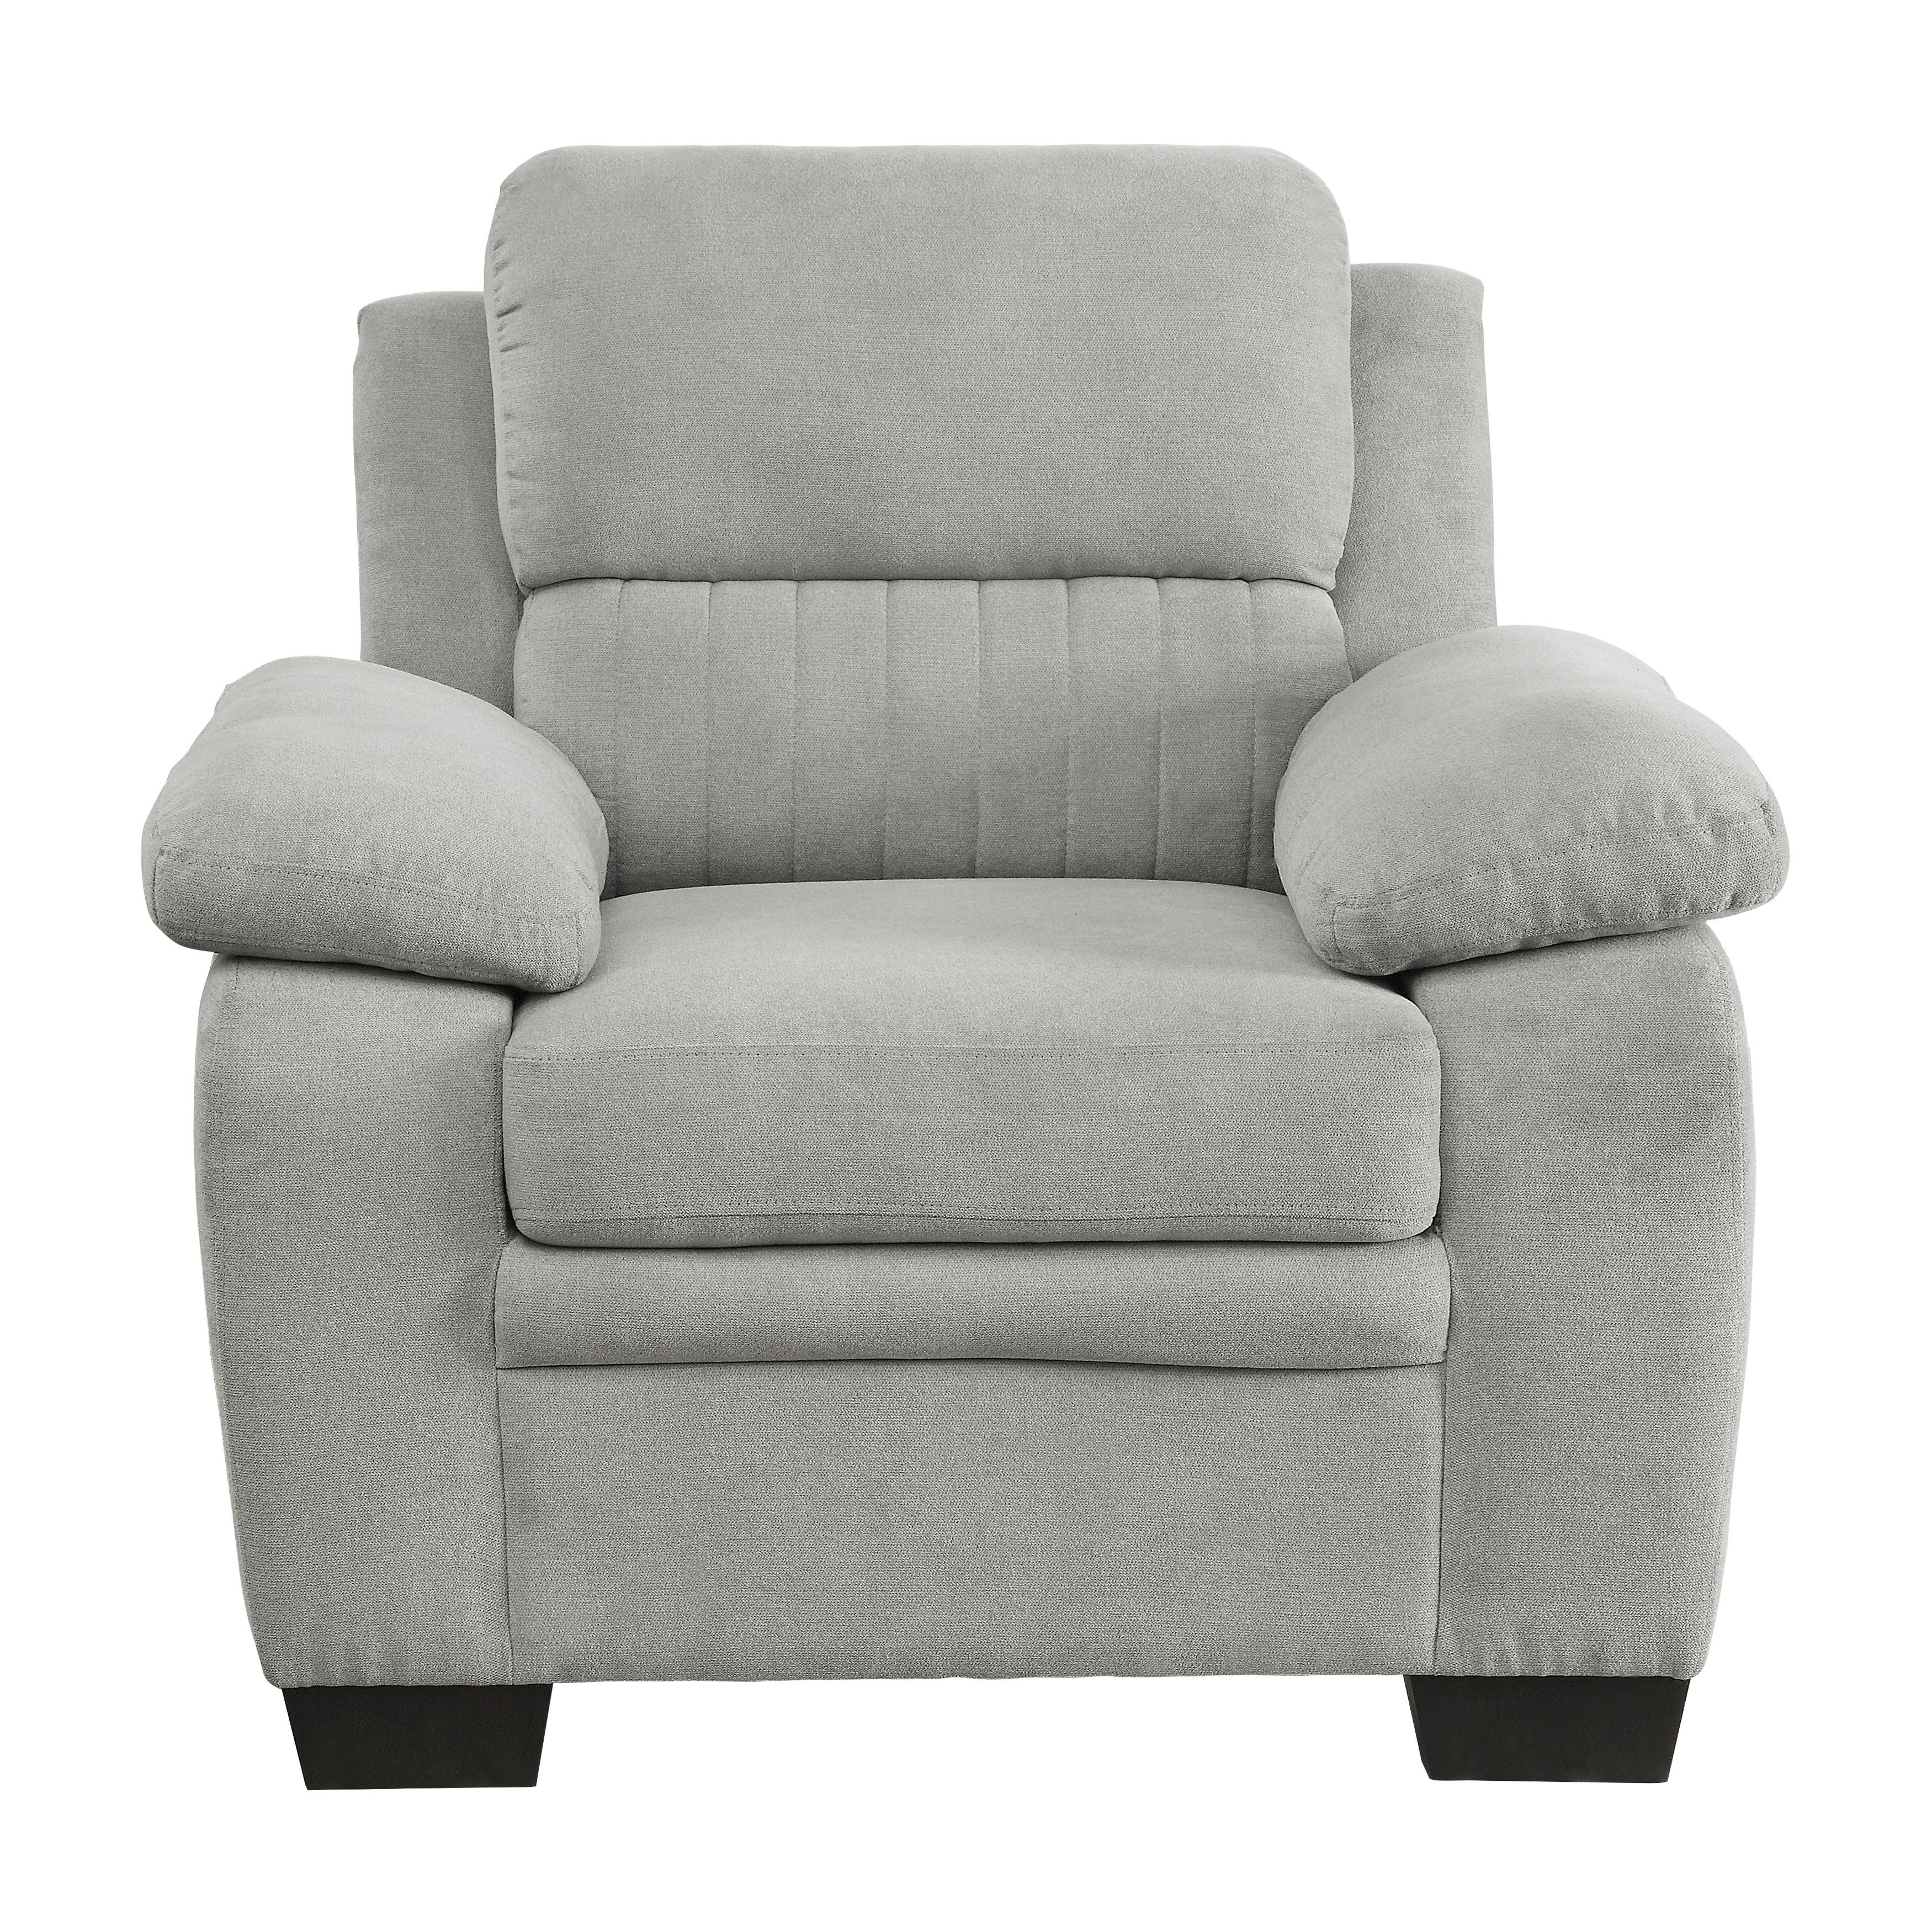 Modern Arm Chair 9333GY-1 Holleman 9333GY-1 in Gray 